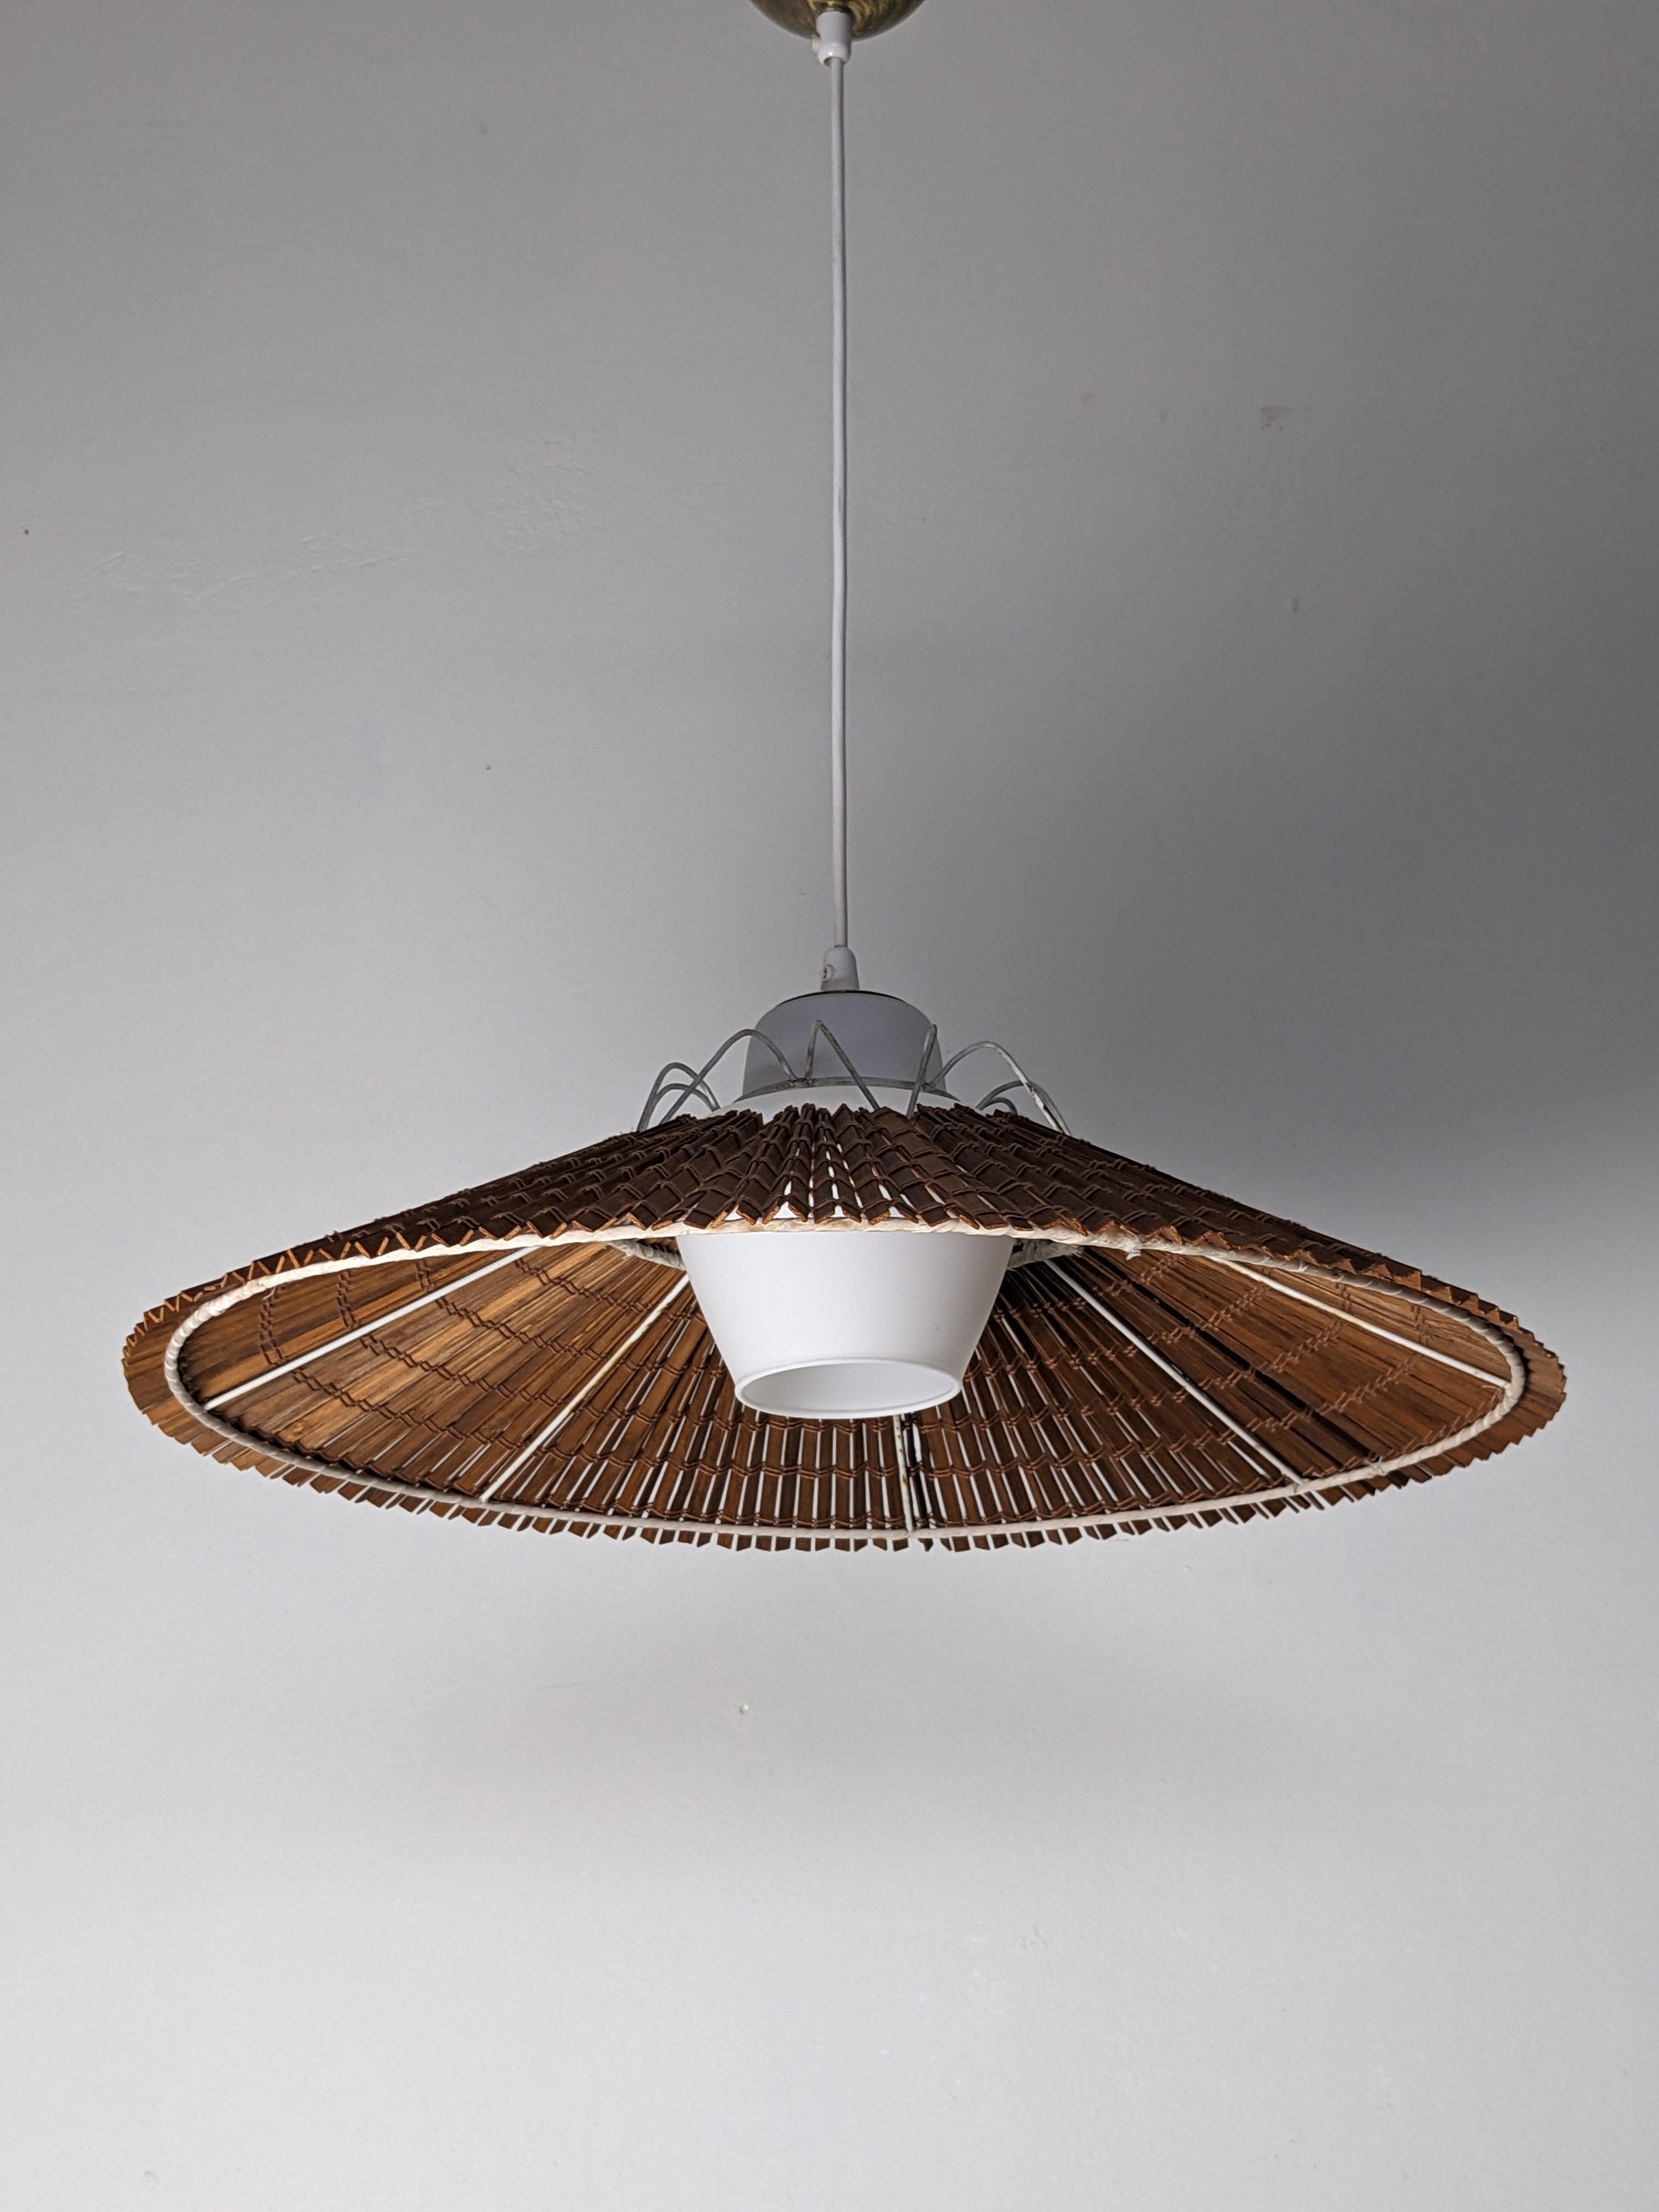 Pendant lamp by Lisa Johansson-Pape.
Manufactured by Orno in Finland in the 1950s.

White opaline glass diffuser with a wooden shade and beautiful brass details.

Labeled ORNO.

Literature: Orno catalogues of the period.

Adjustable height. From 30